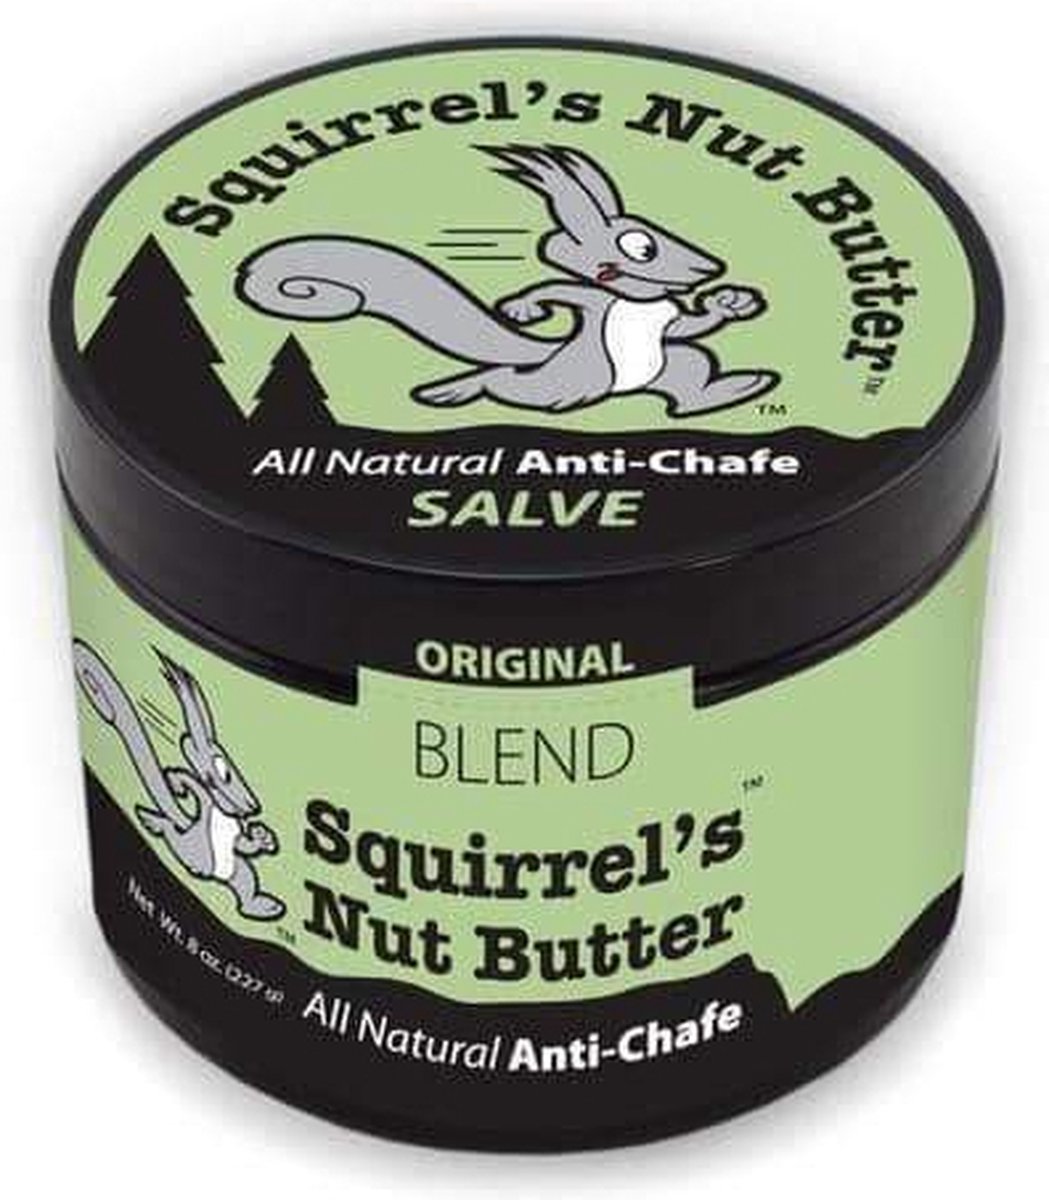 Squirrel's Nut Butter Anti-Chafe Tub (4.0 ounce / 113 gram)